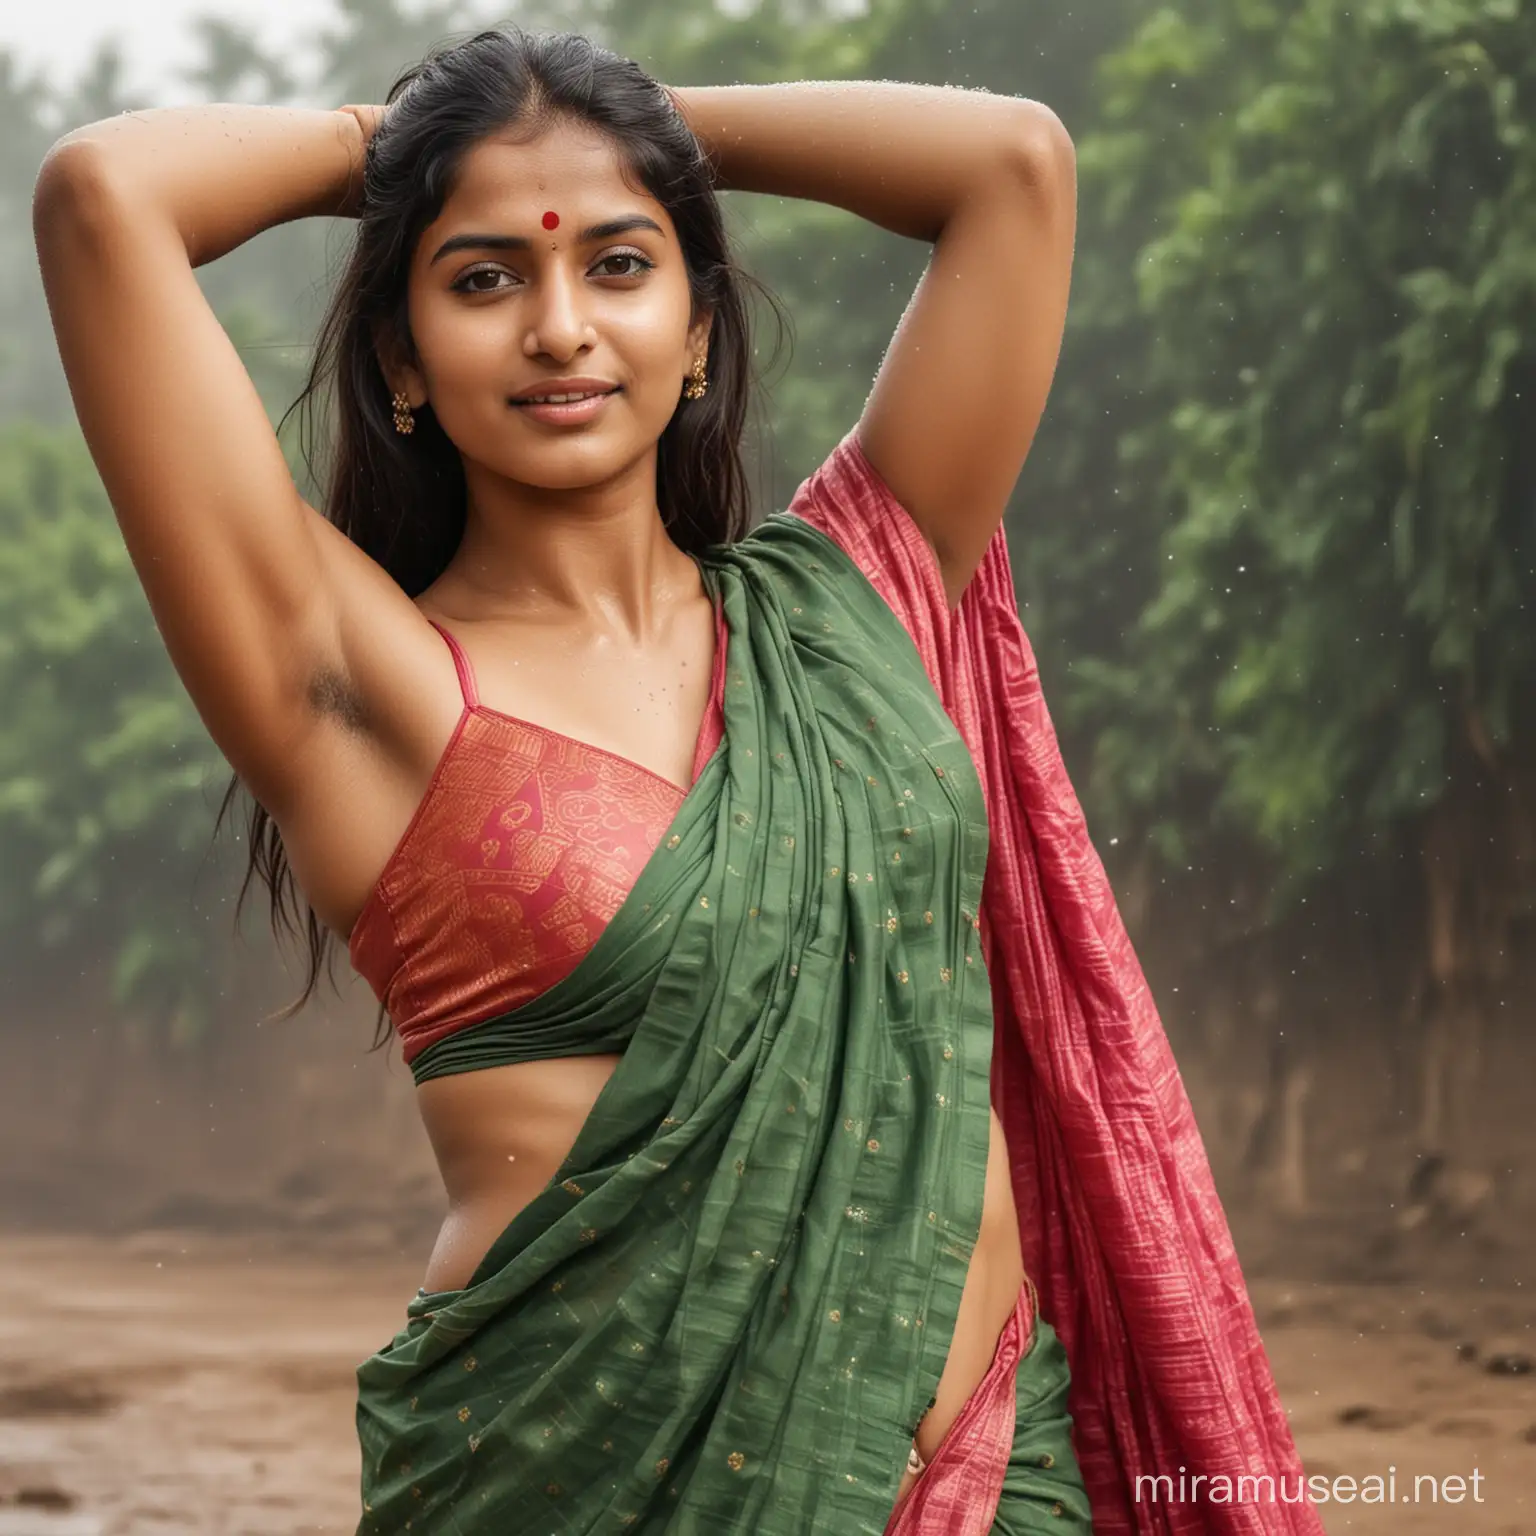 Indian women,saree with no jacket,arms up,showing navel,body covered with sweat,sweat on armpits